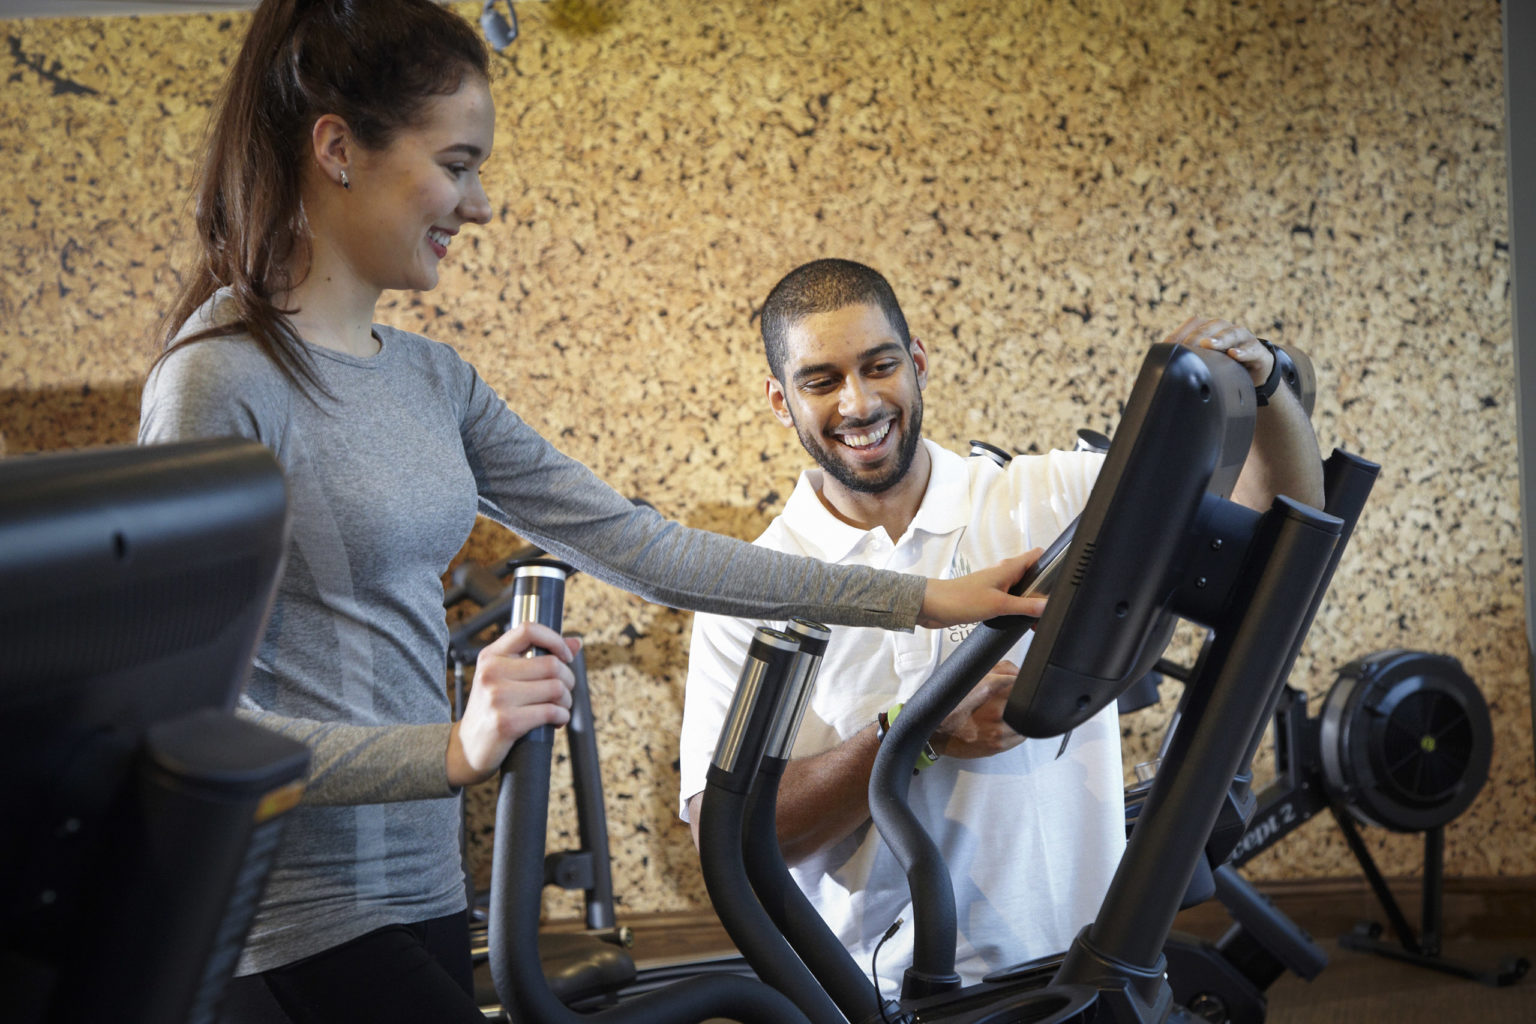 A personal trainer guiding someone on gym equipment at Swinton Country Club near Masham and Ripon